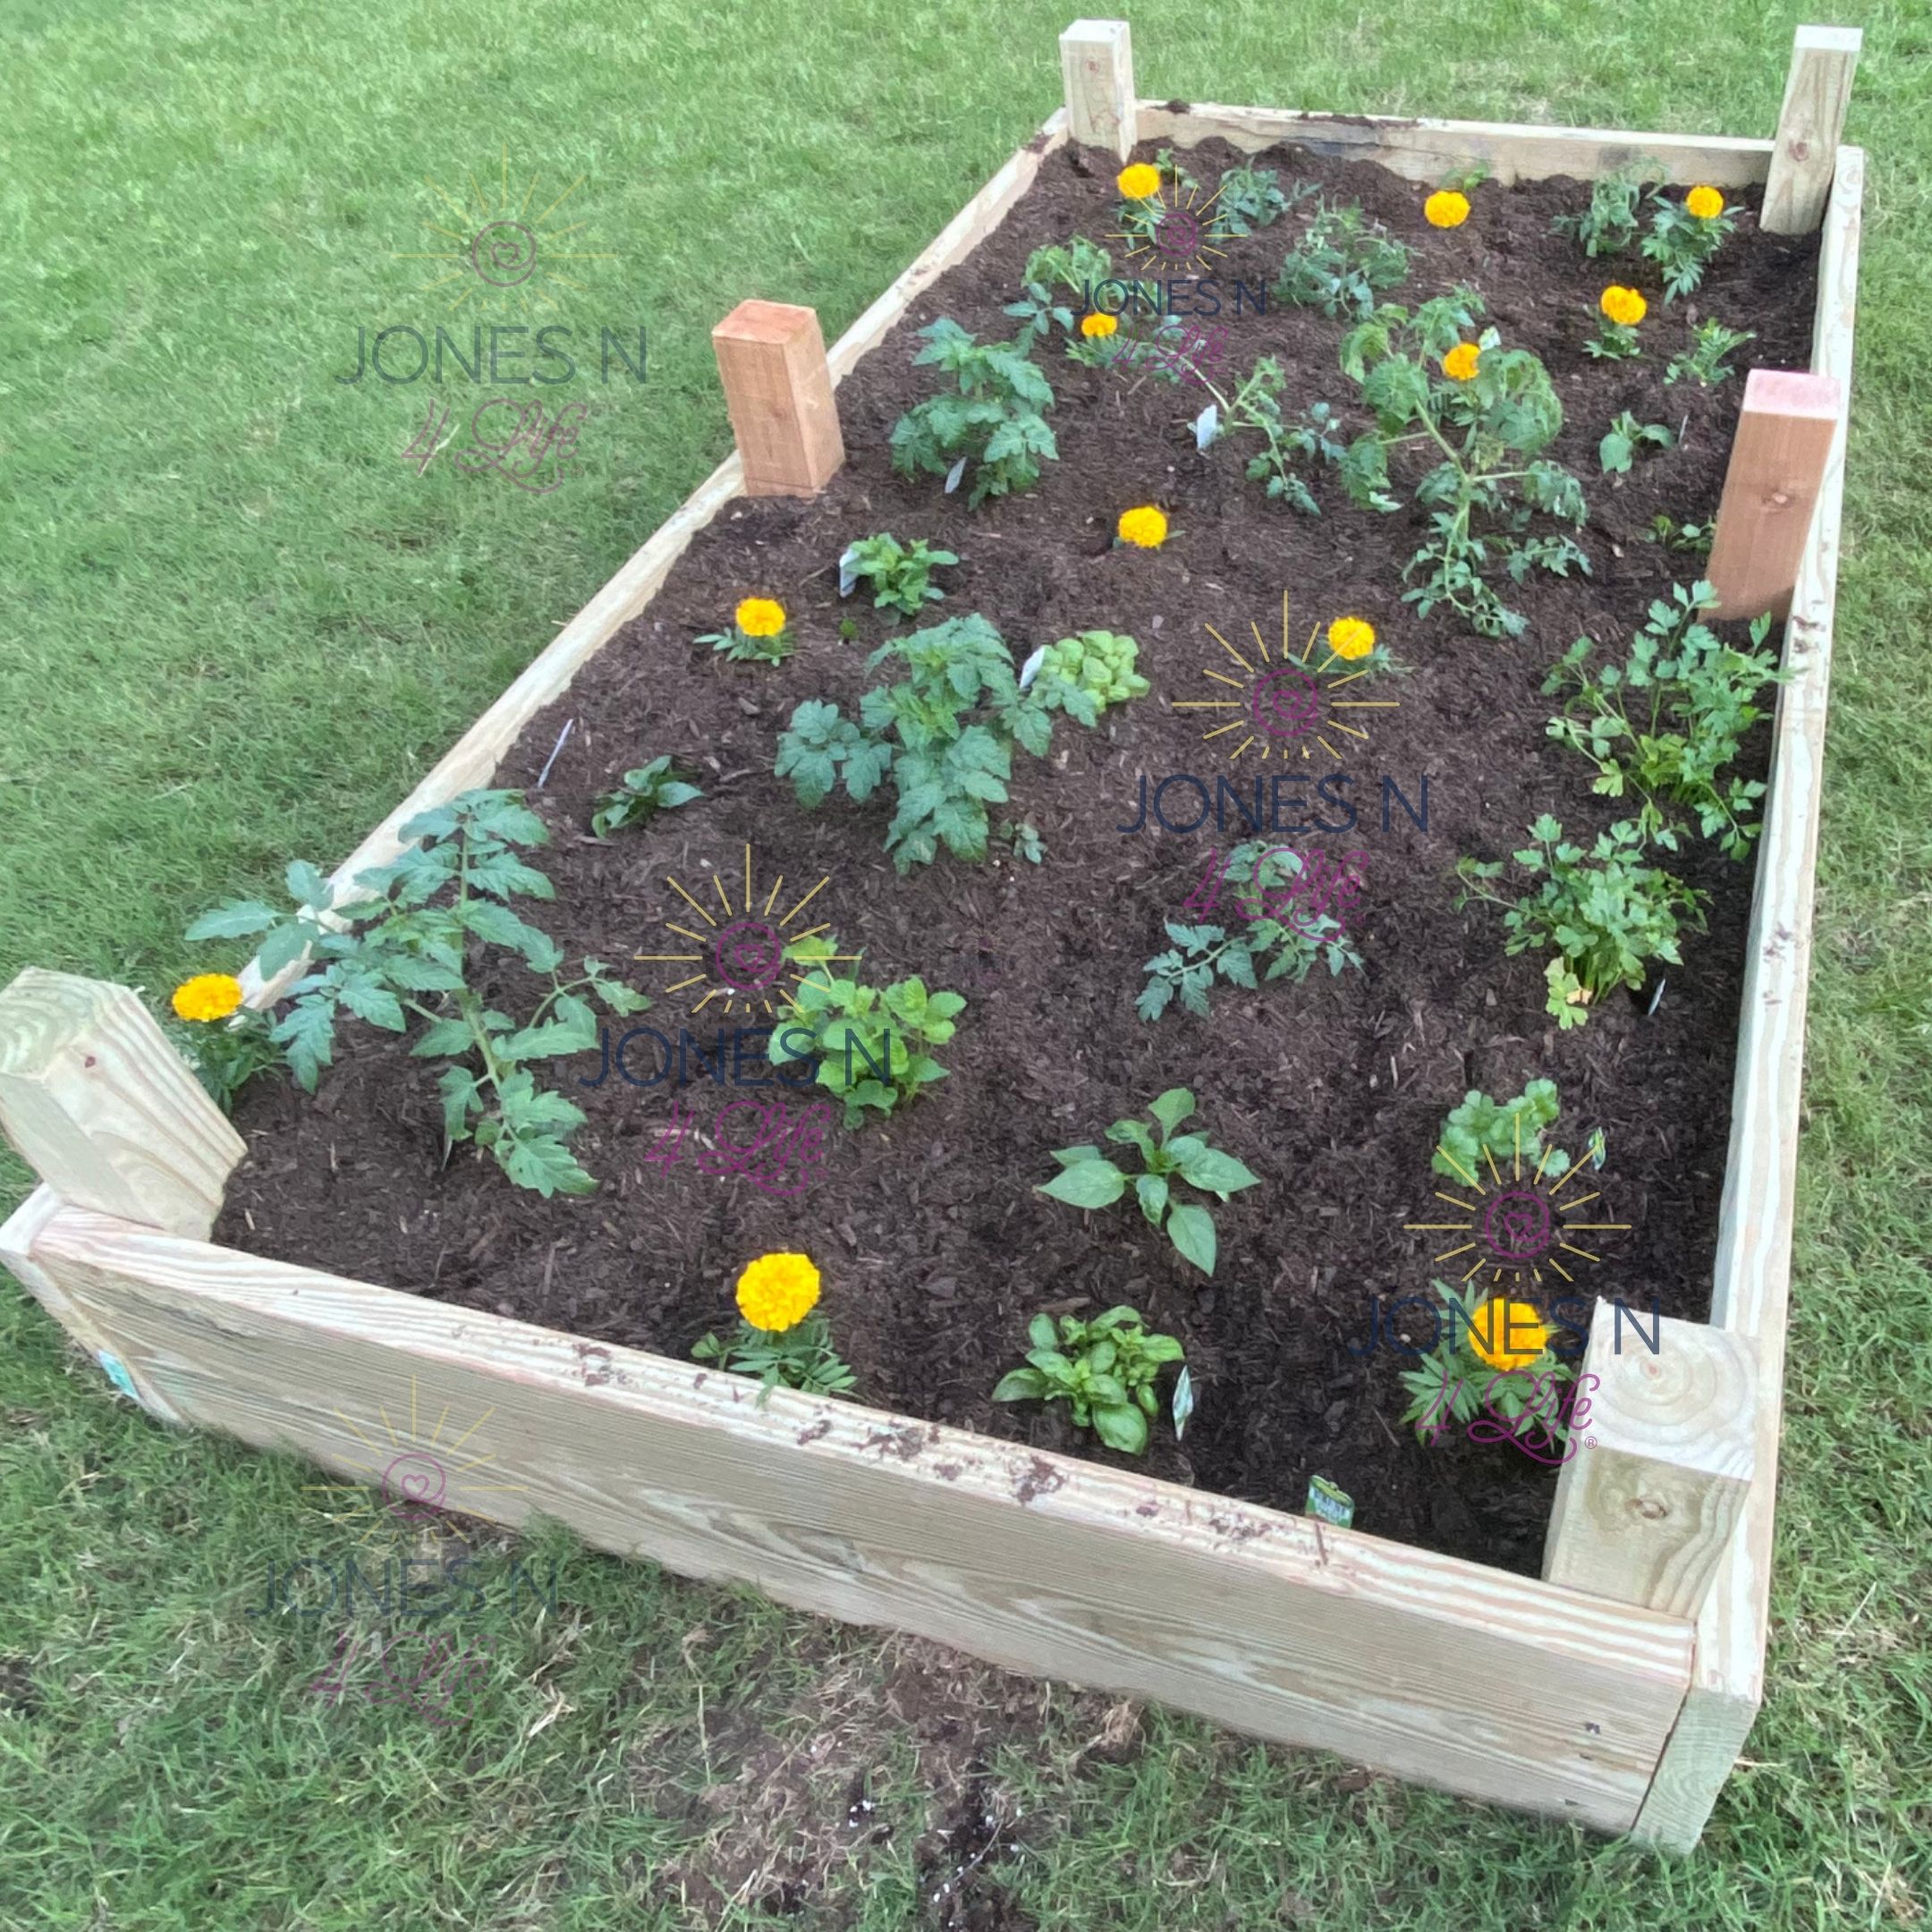 A raised flower bed with plants and flowers planted.